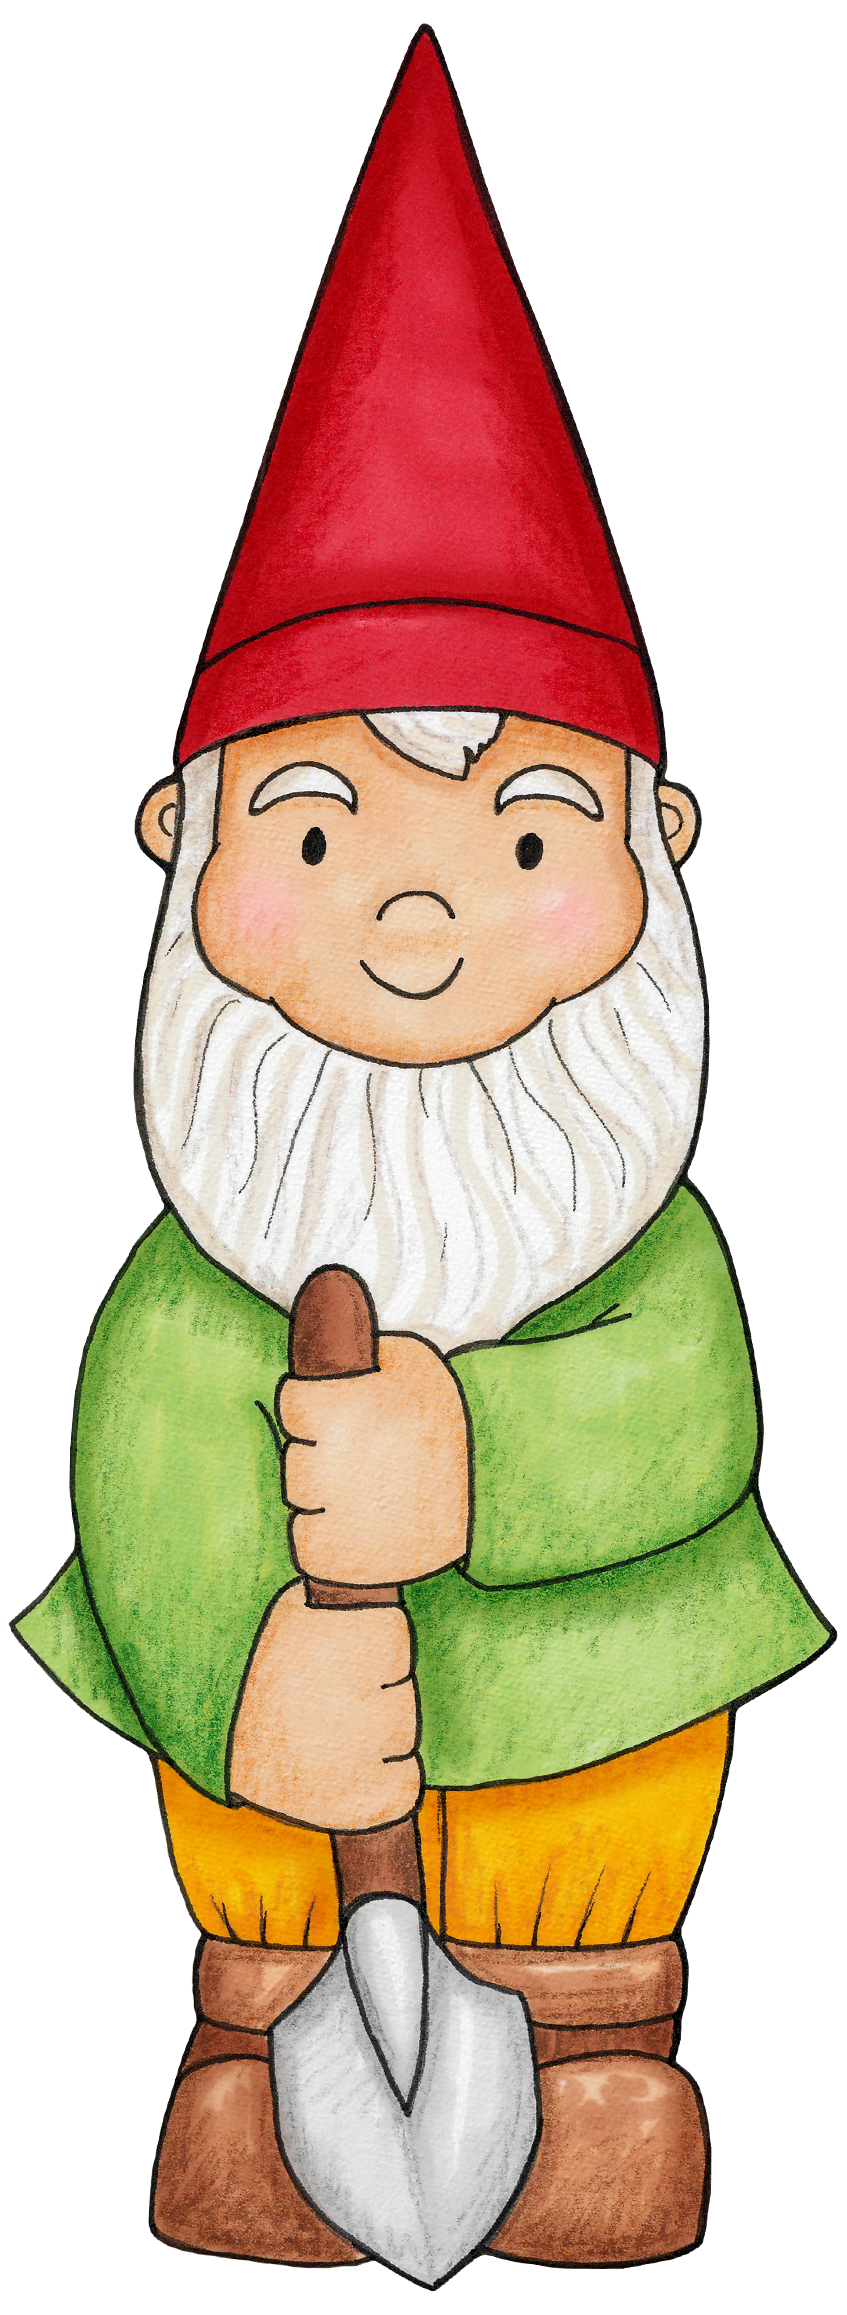 Download Gnome clipart animated, Gnome animated Transparent FREE ...